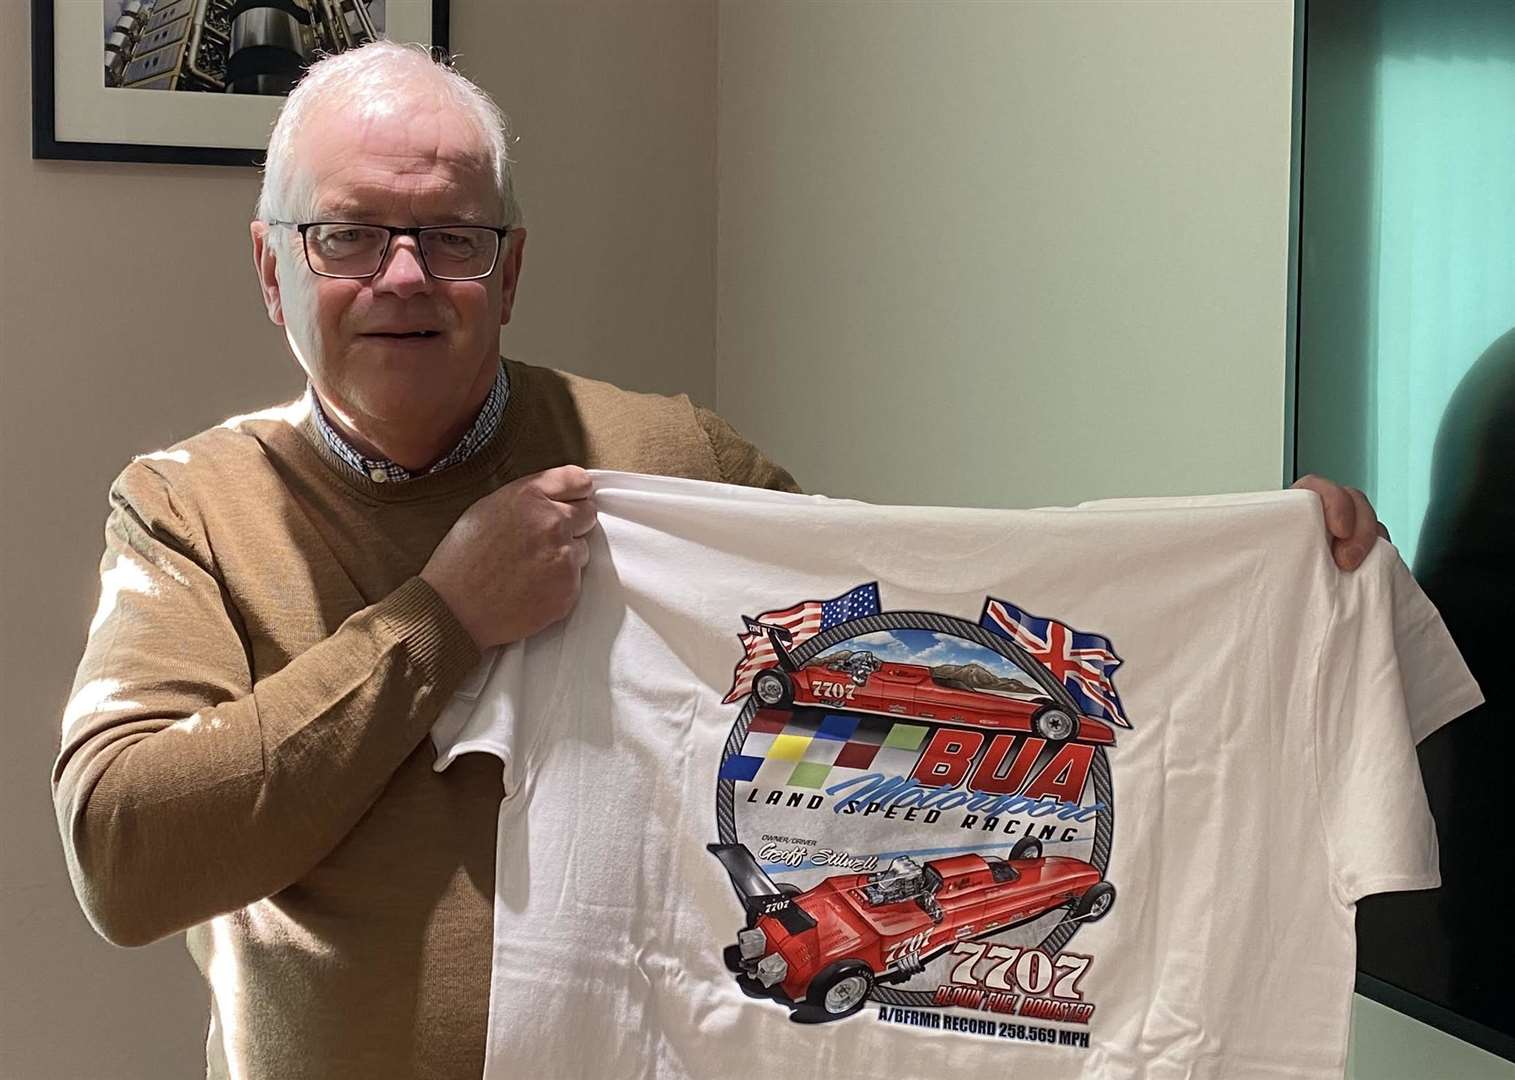 Geoff Stilwell with one of his racing team's shirts. Picture: Geoff Stilwell